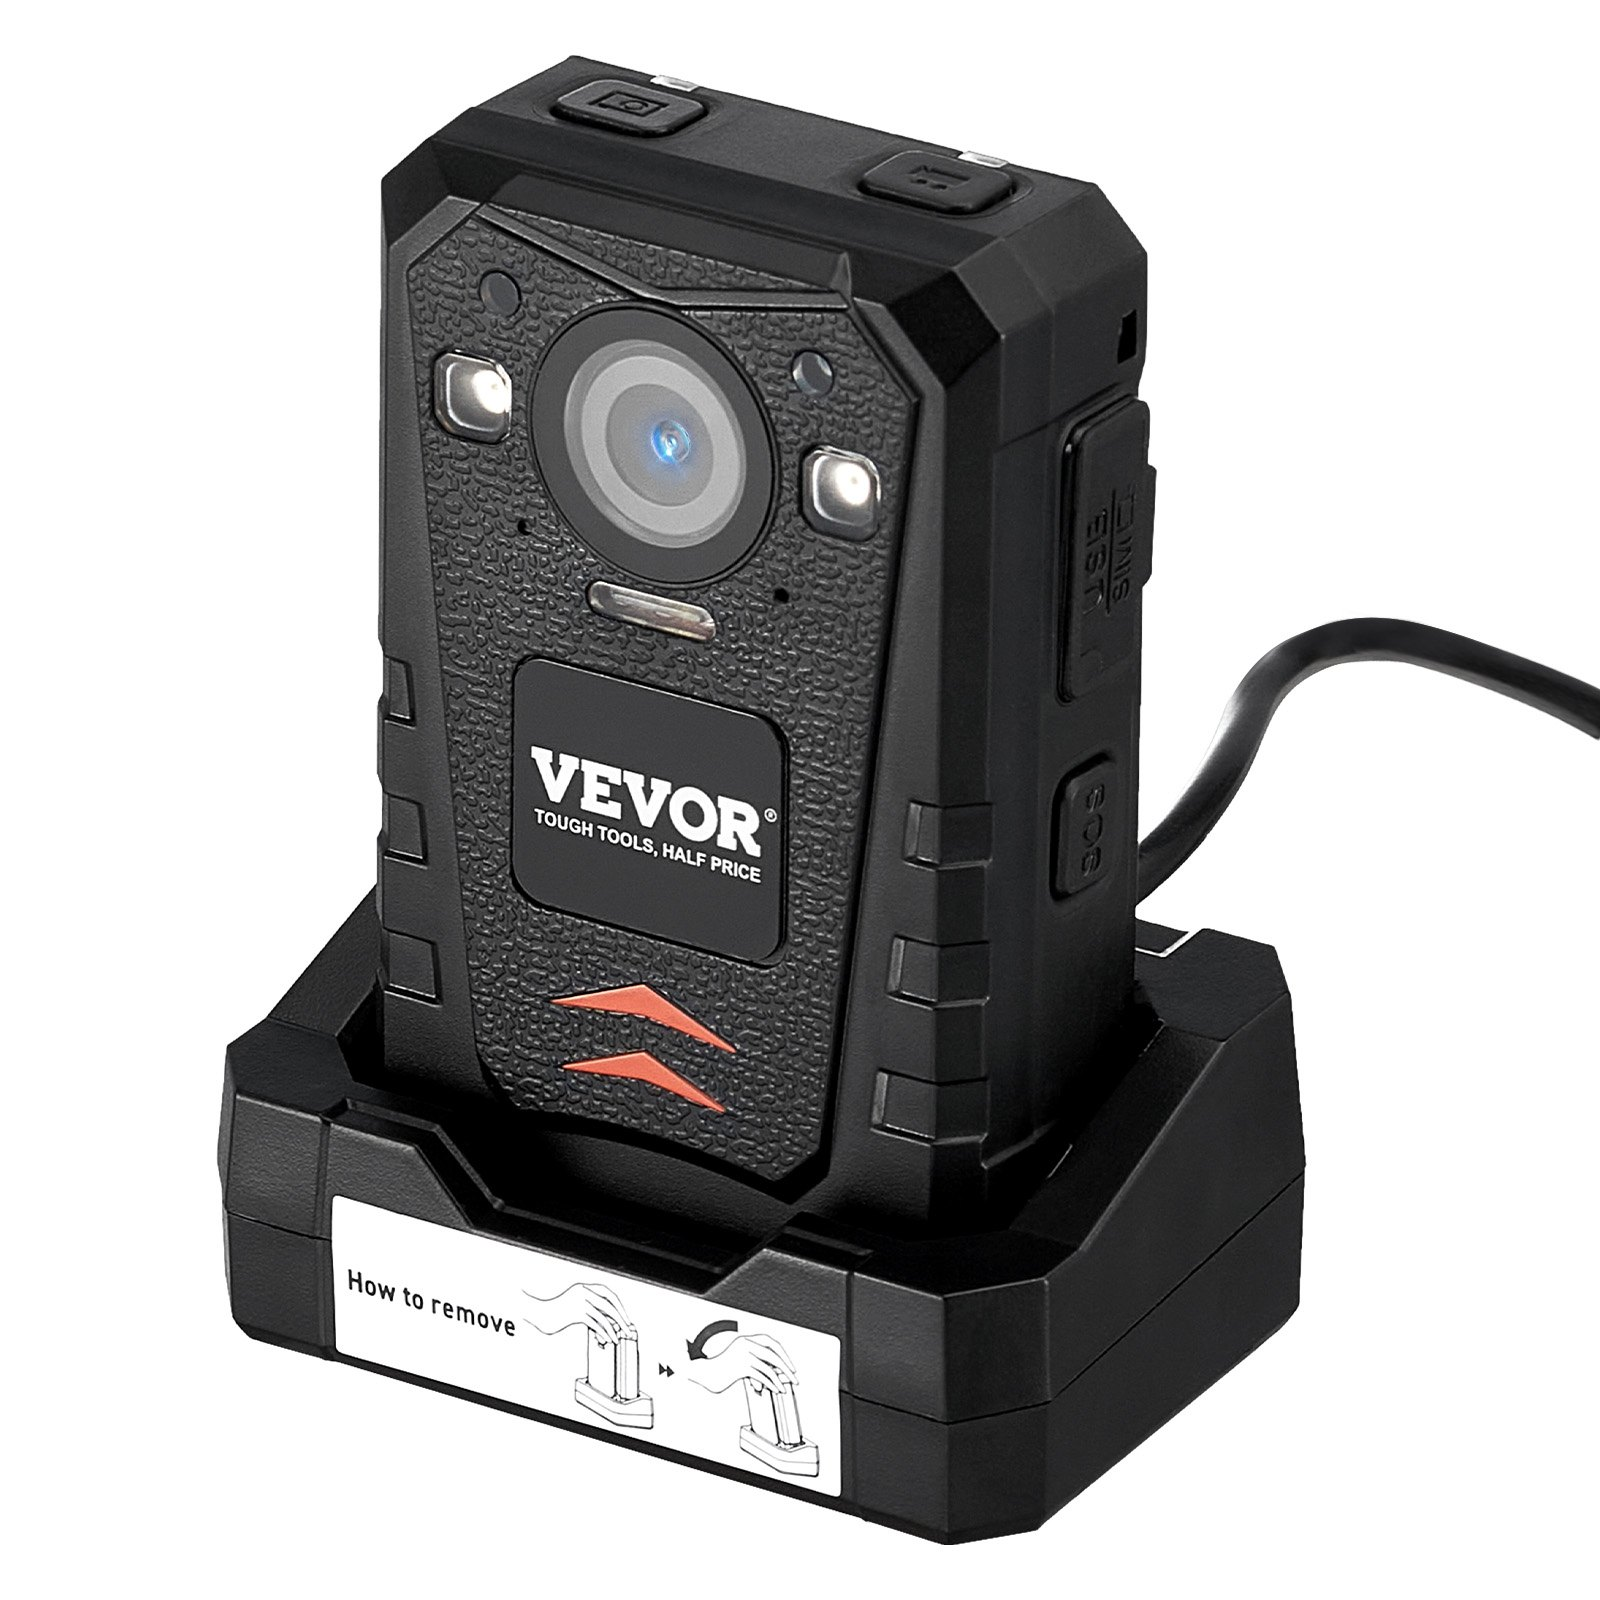 VEVOR 1440P HD Police Body Camera, 128GB Body Cam with Audio Video Recording Picture, Built-in 3500 mAh Battery, 2.0" LCD, Infrared Night Vision, Waterproof GPS Personal Body Cam for Law Enforcement, Goodies N Stuff